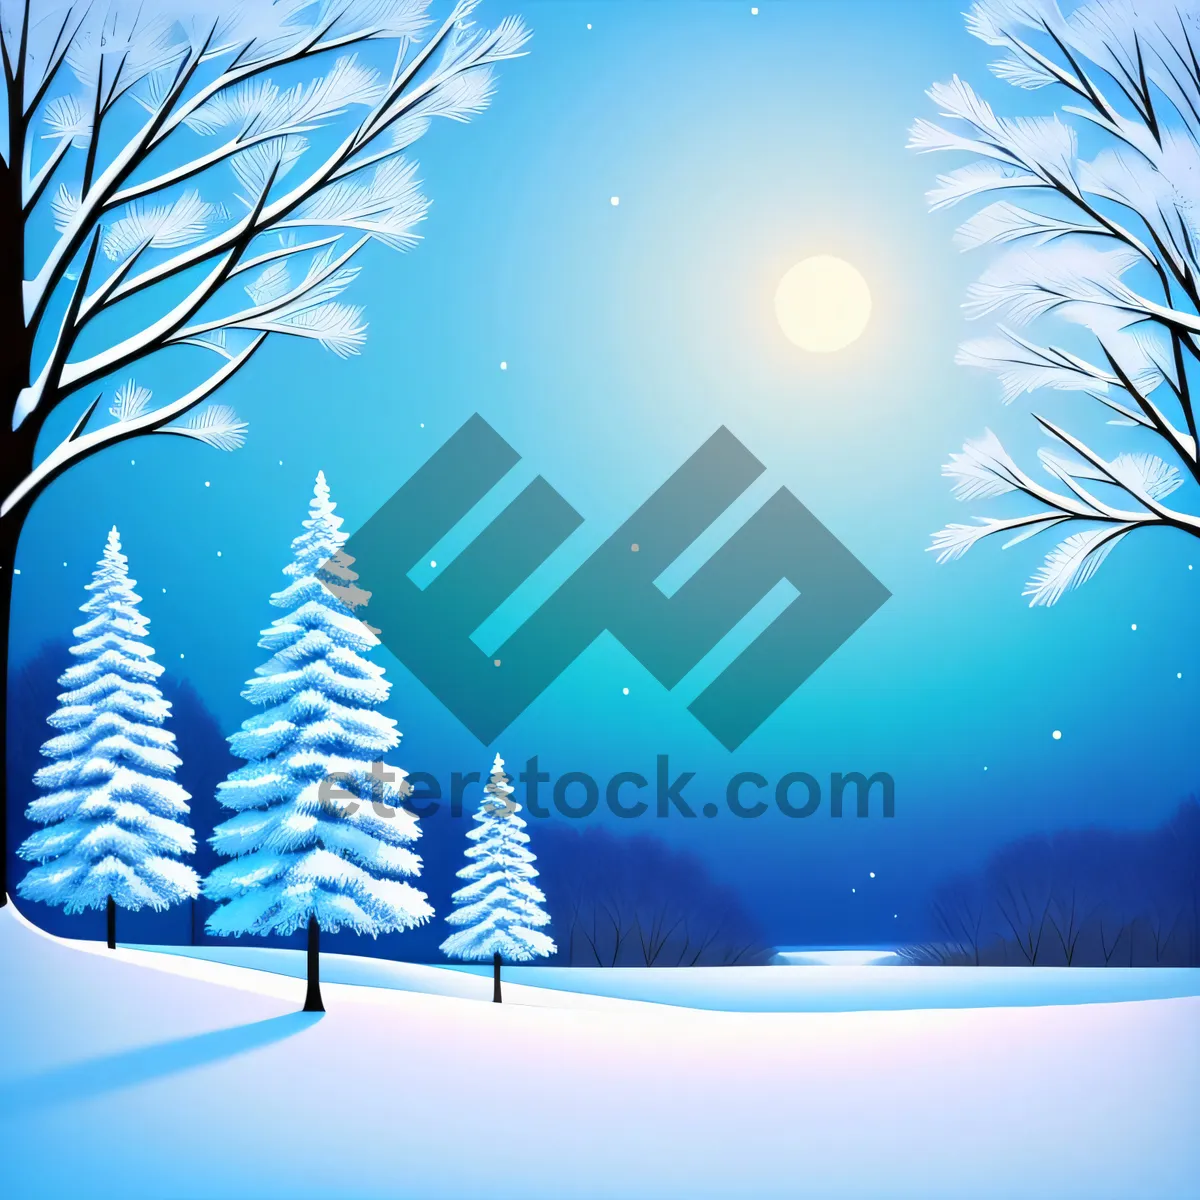 Picture of Winter Wonderland: Festive Evergreen with Snowflake Star